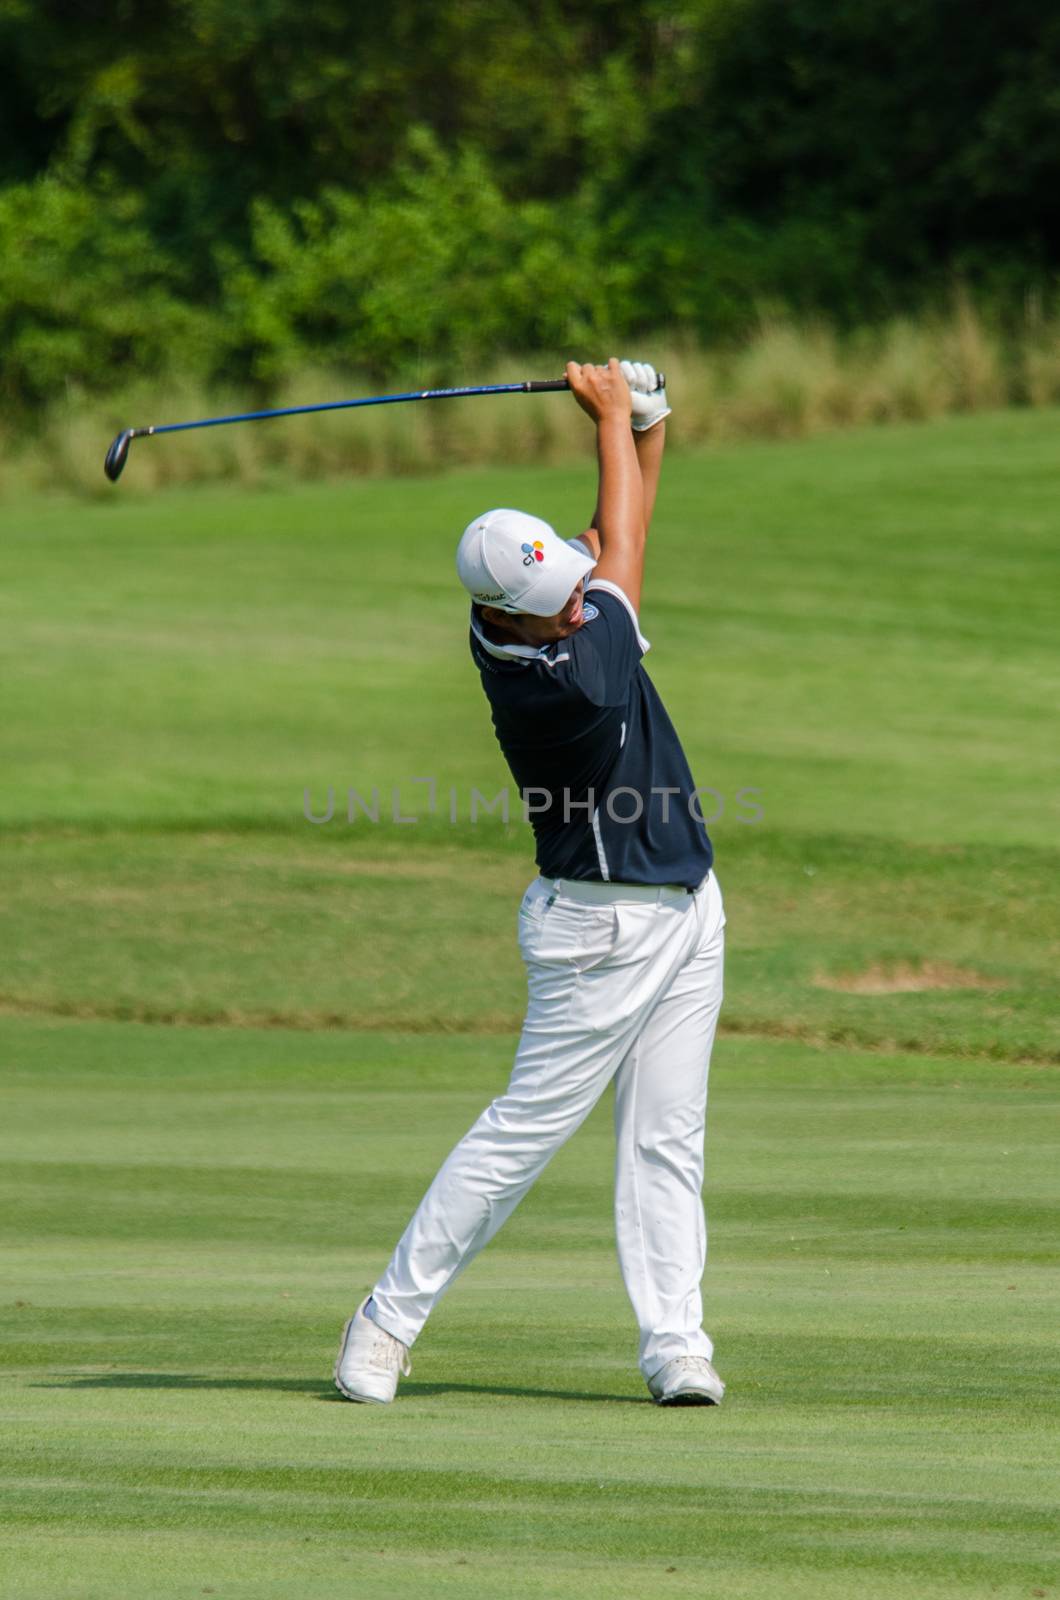 Byeonghun An in Thailand Golf Championship 2015 by chatchai